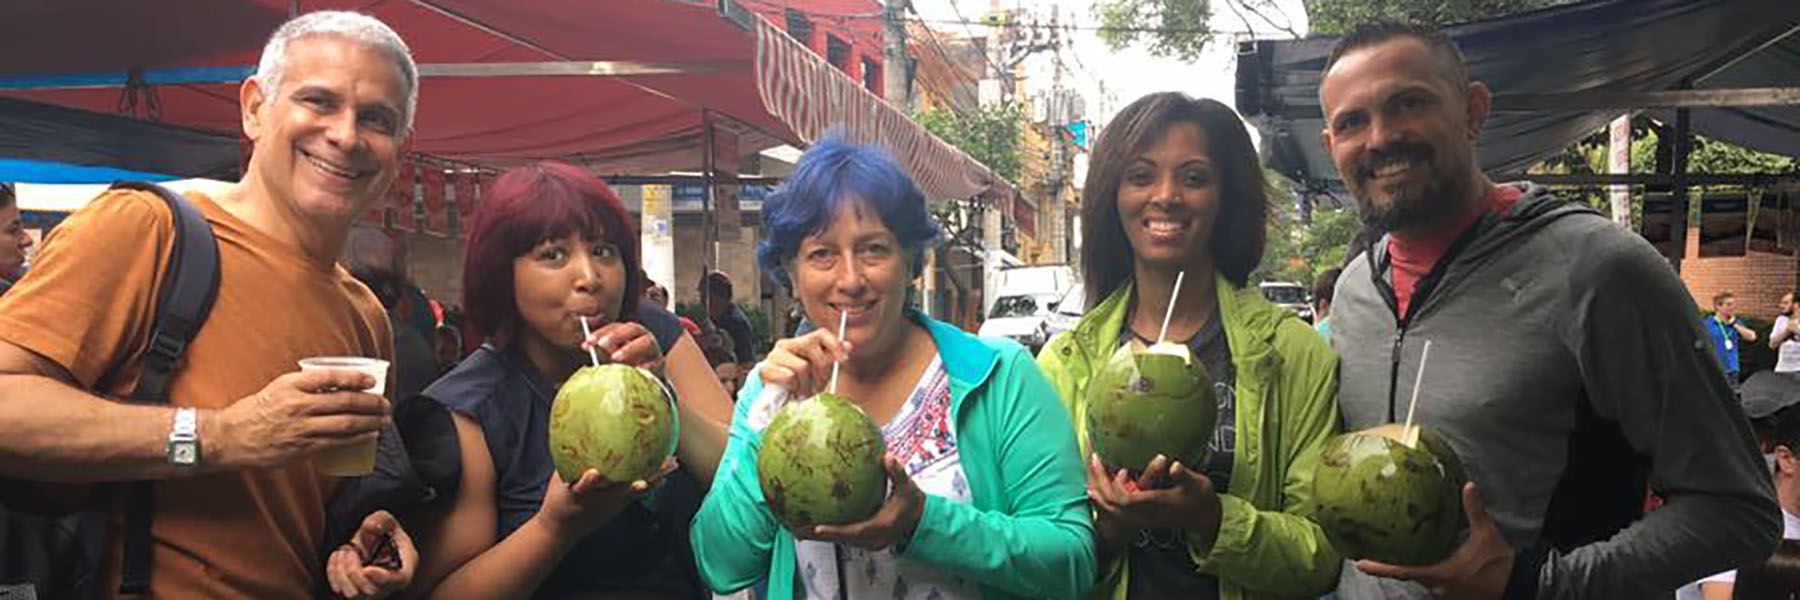 Upward Bound Director and others drinking coconut milk from a coconut.